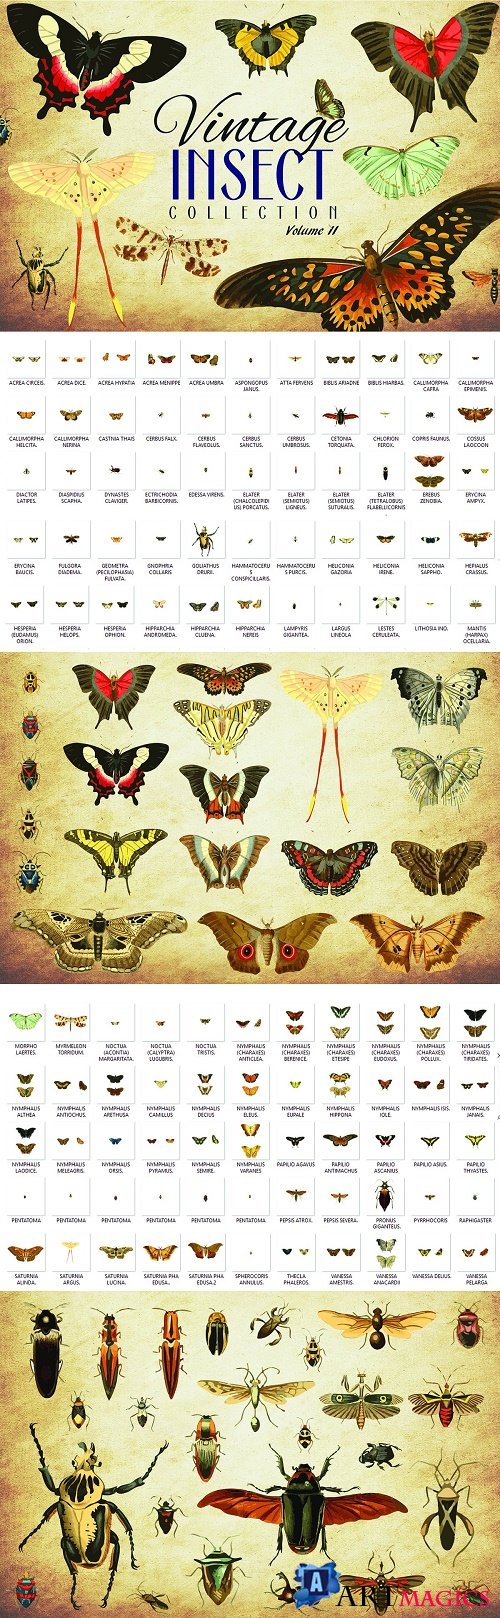 110 Vintage Insect Vector Graphics 2 - 3481948